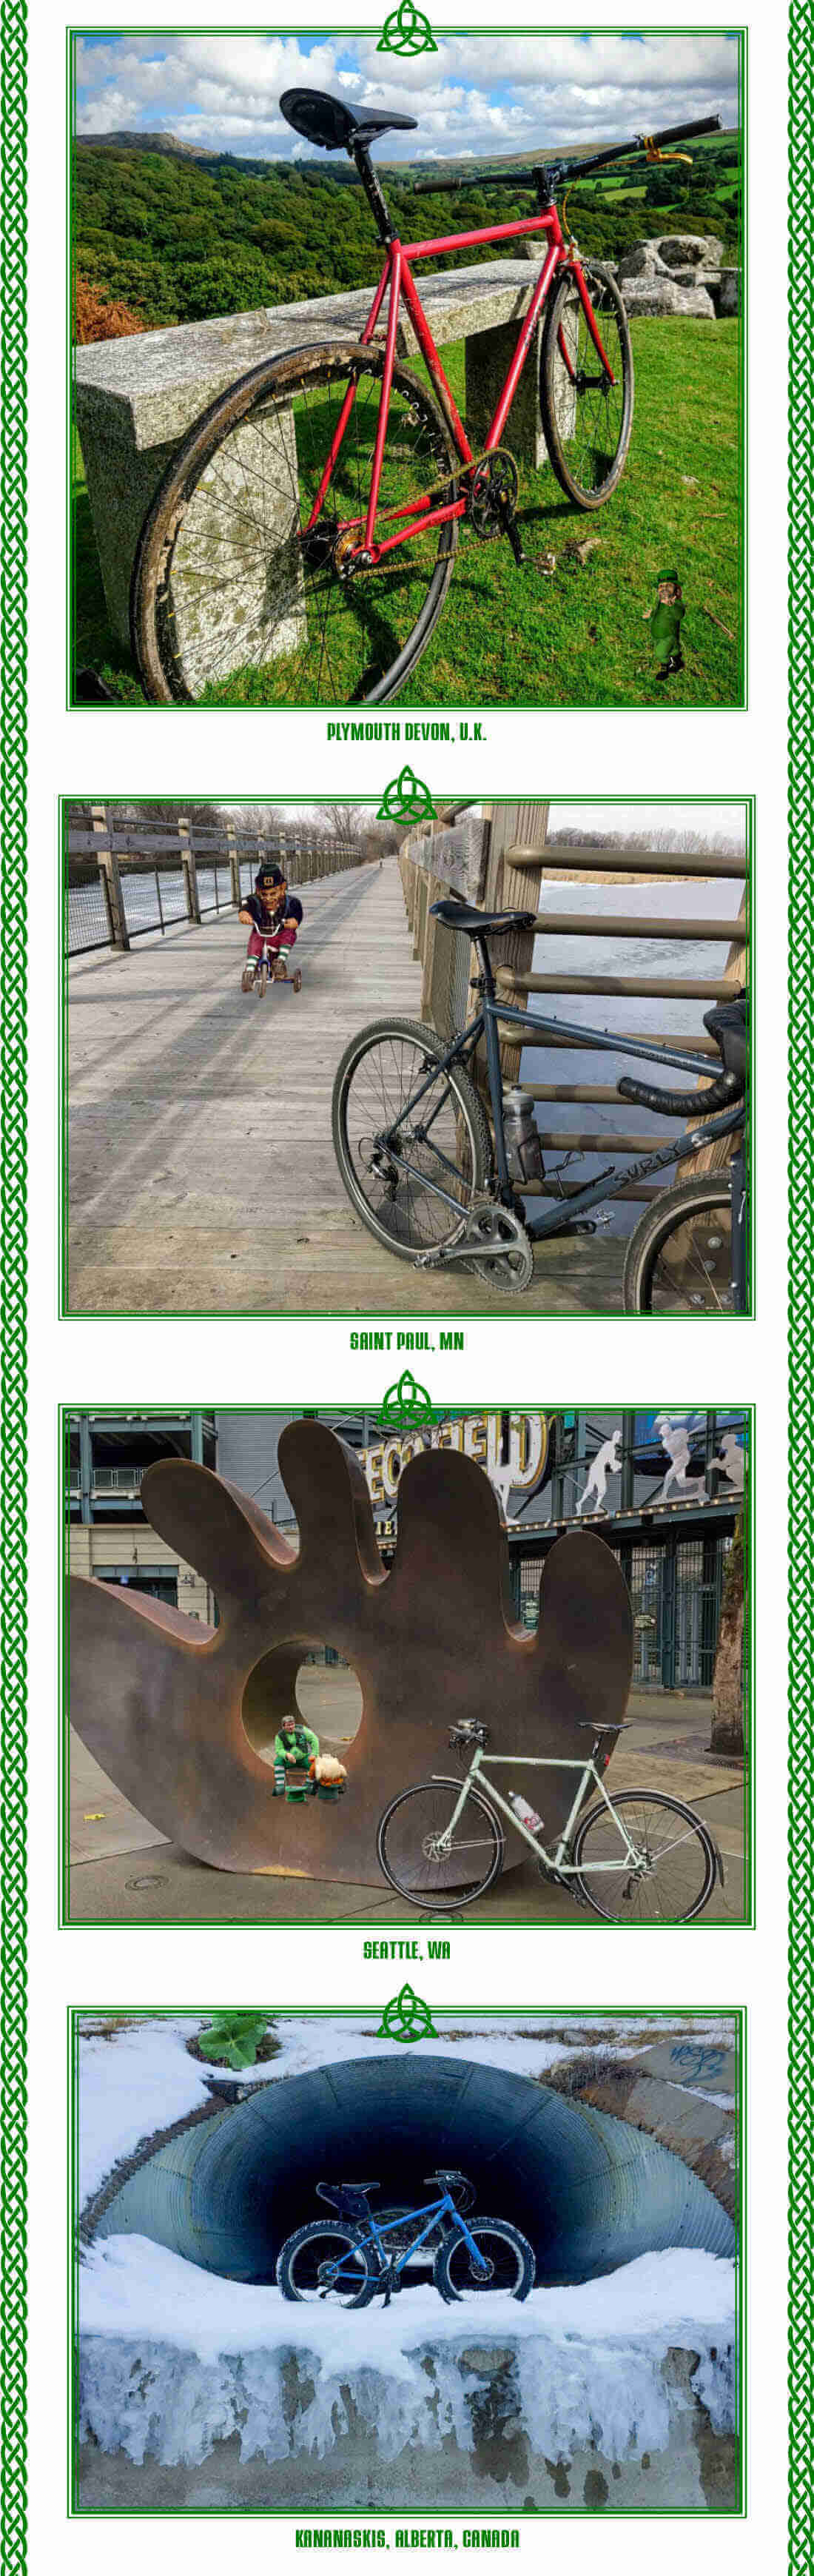 Multiple images of Surly bikes, with their specific location shown below each image